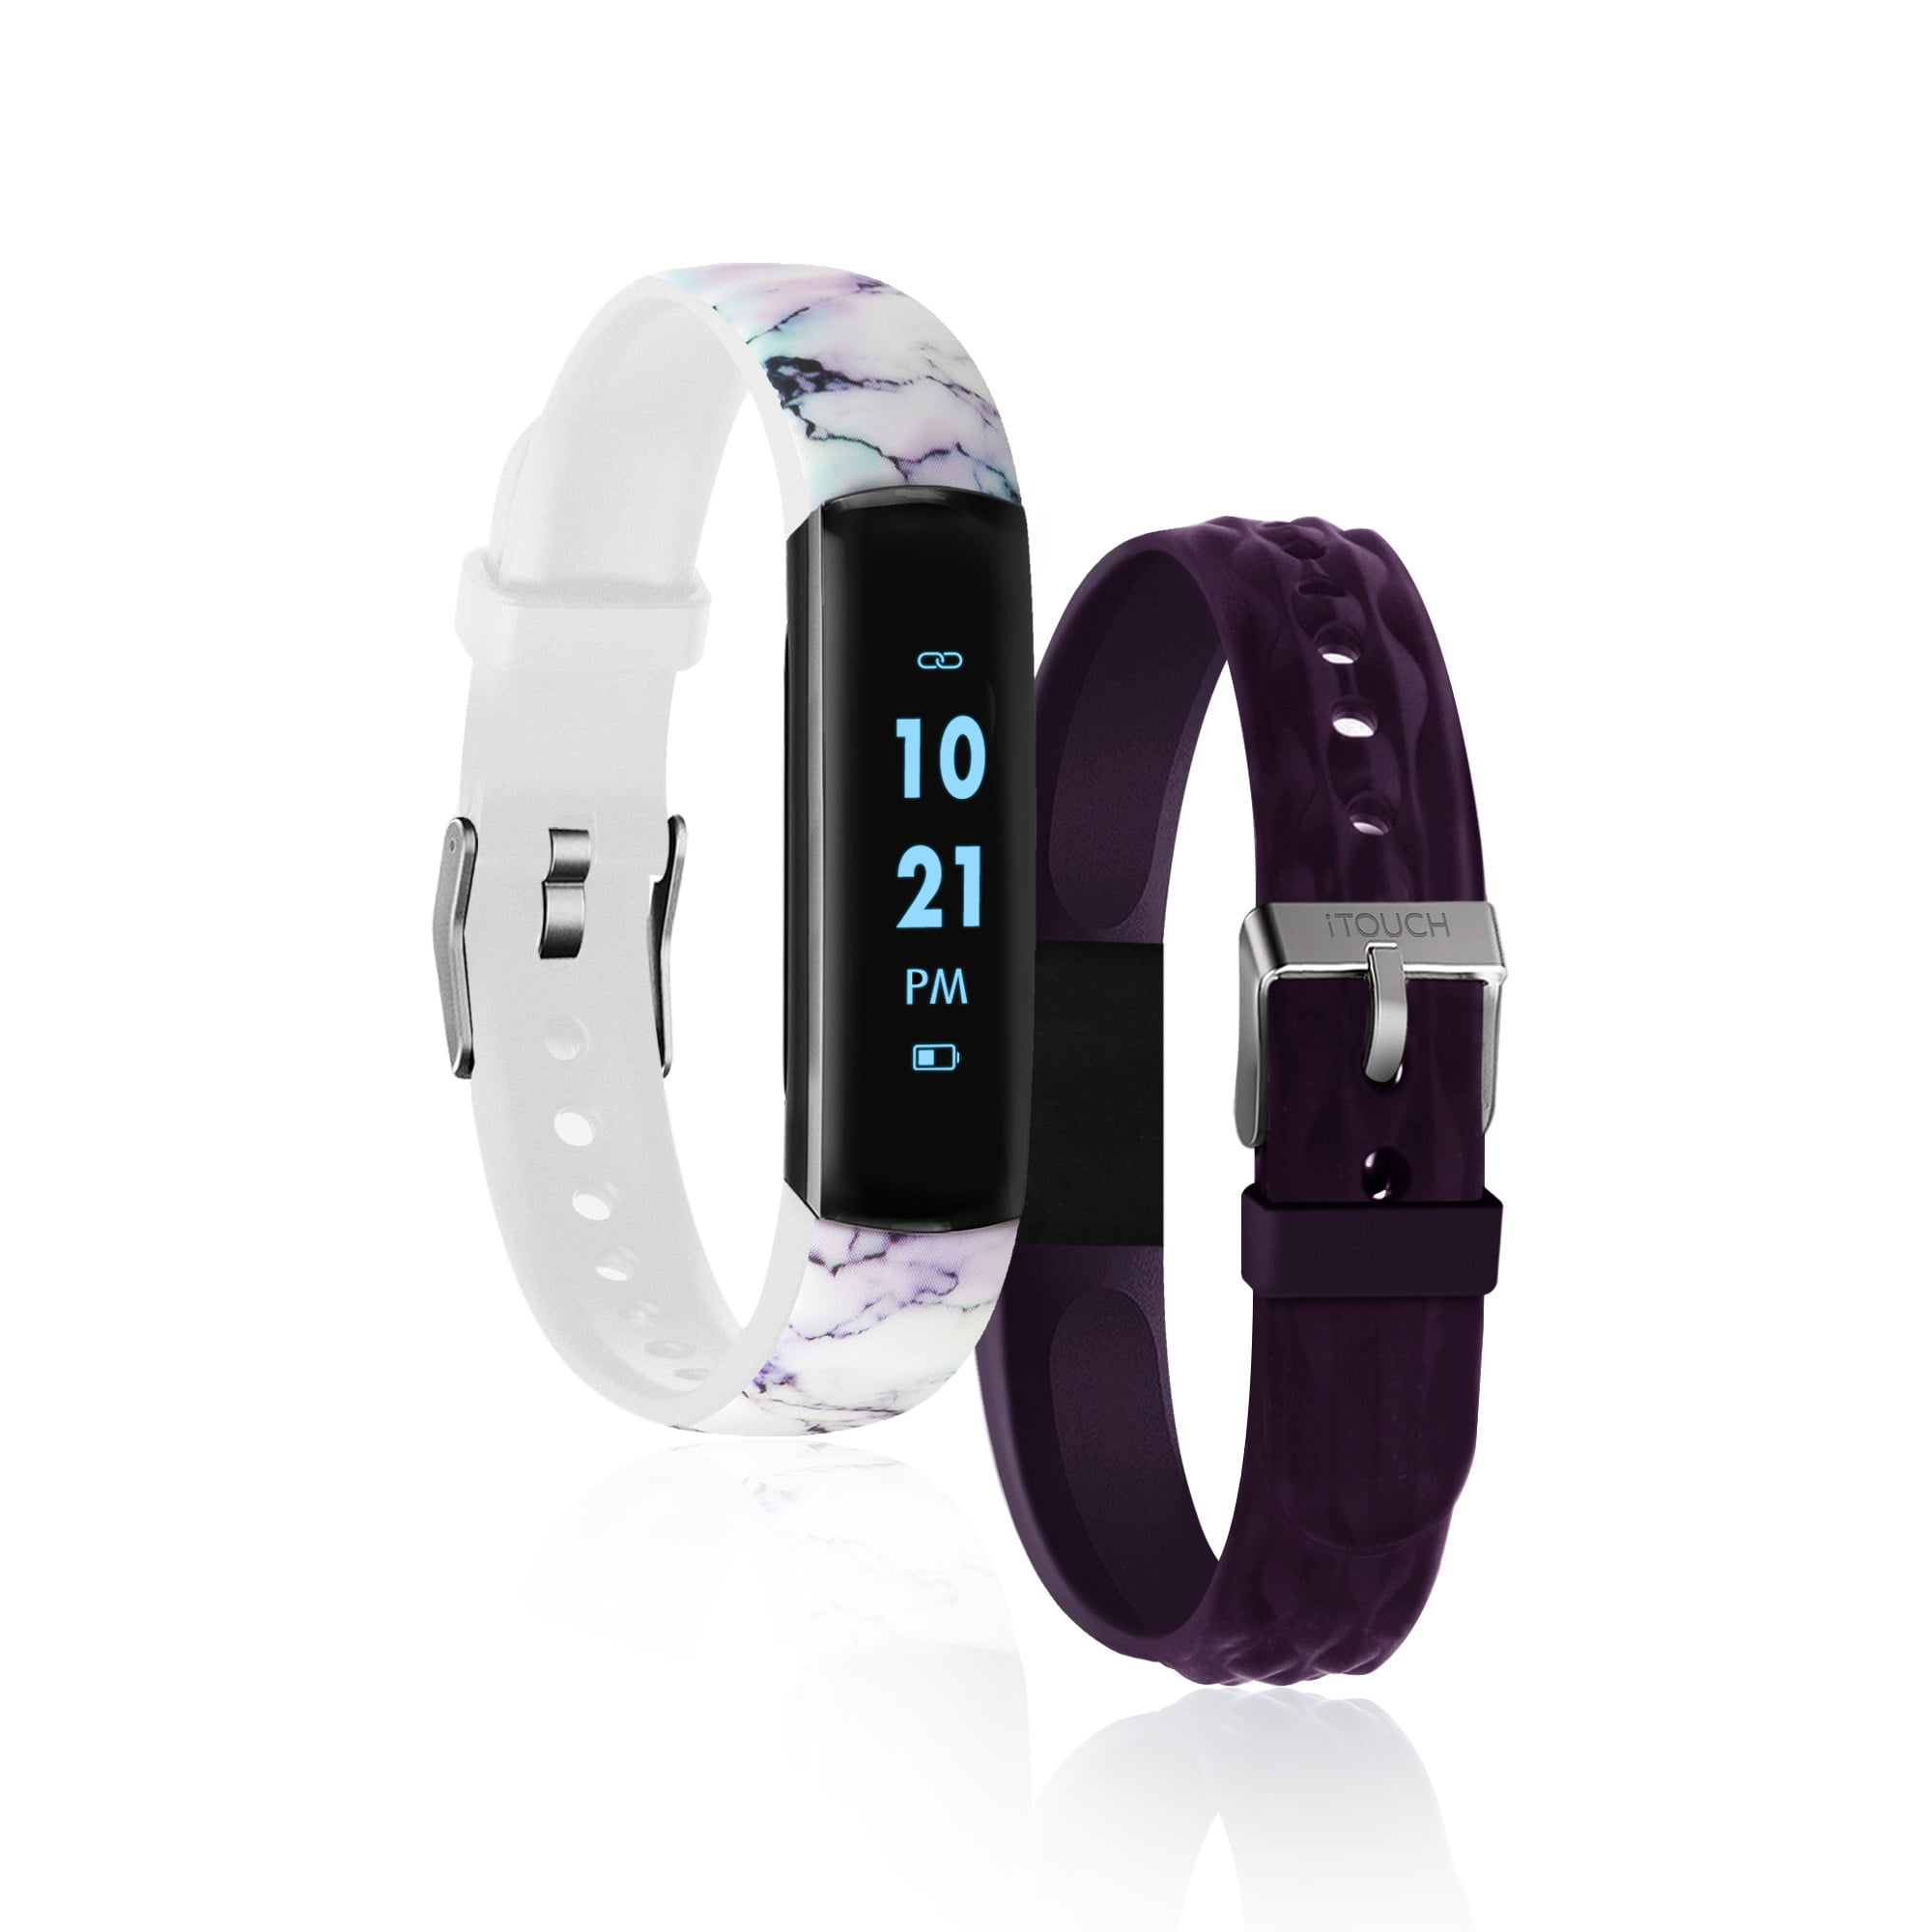 itouch slim fitness tracker vs fitbit